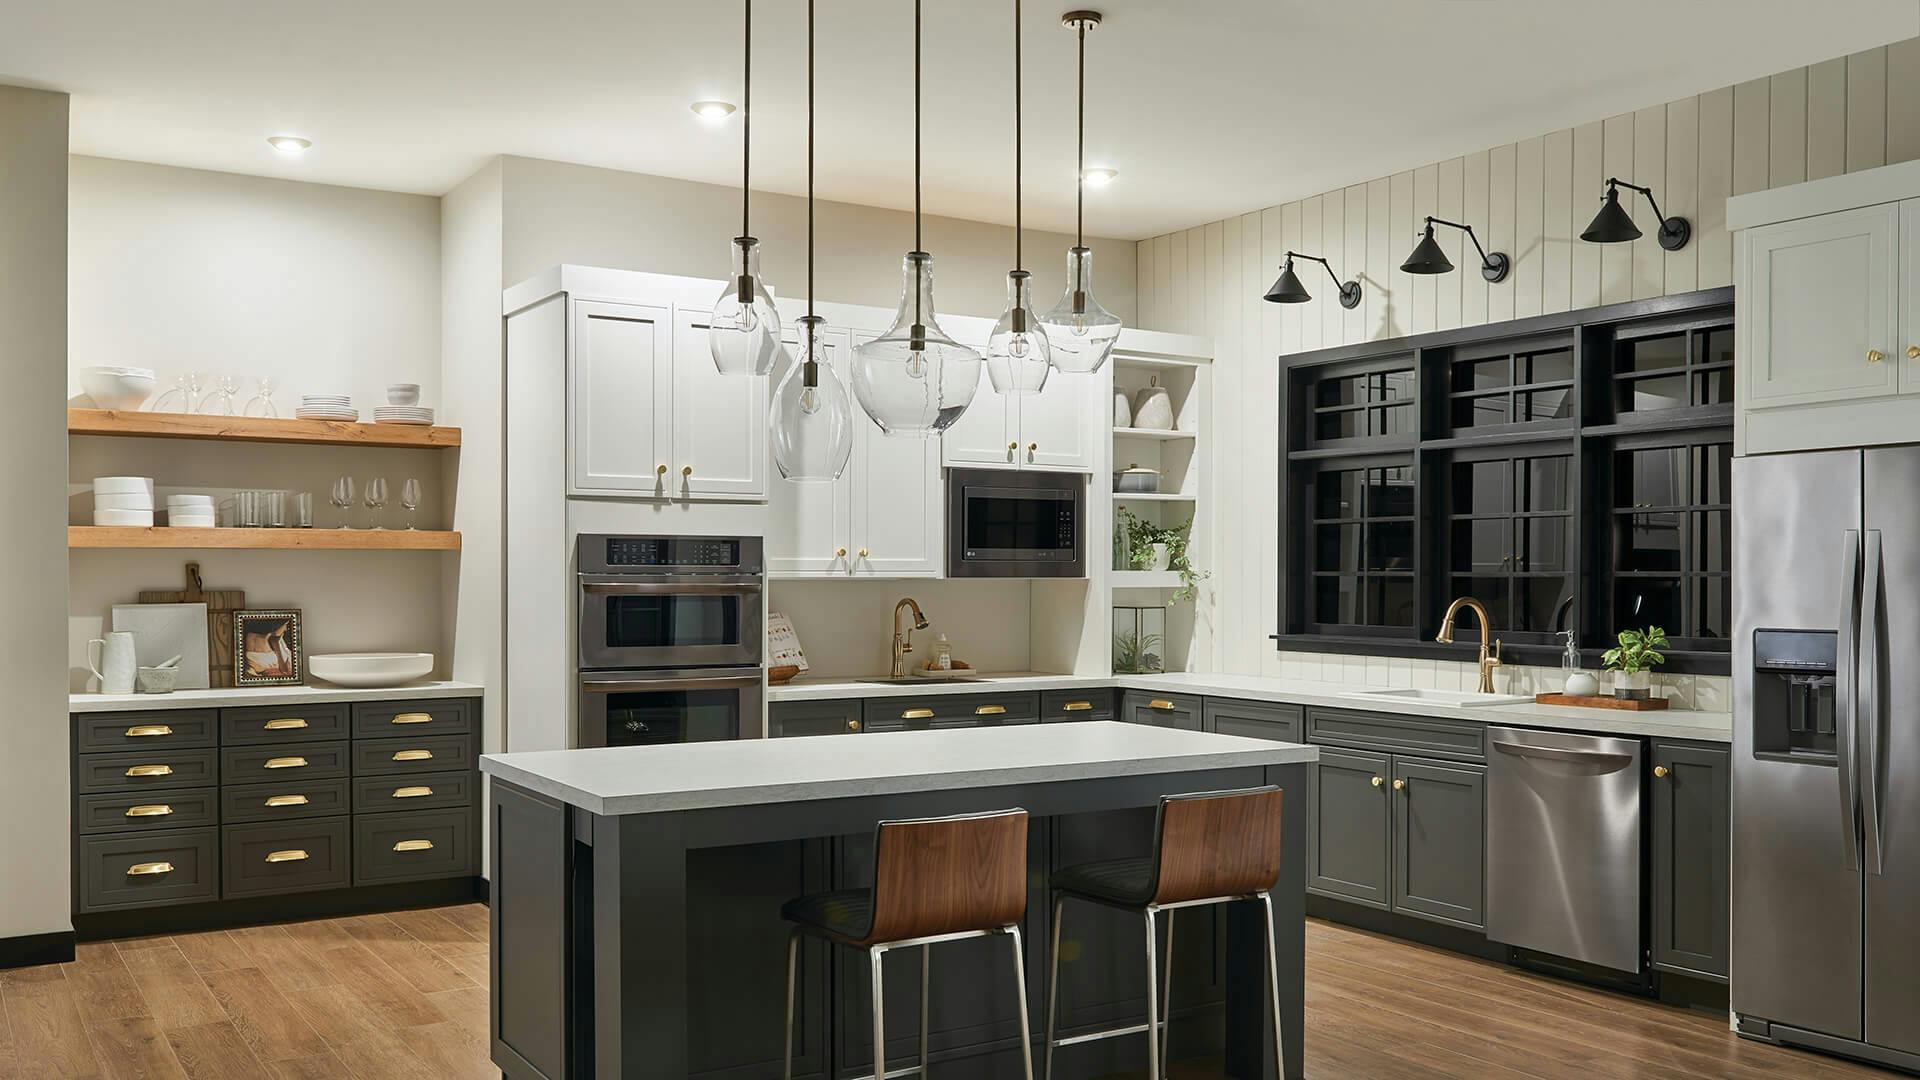 A kitchen with ceiling lights turned on at night while the featured Everly and Ellerbeck lights are off